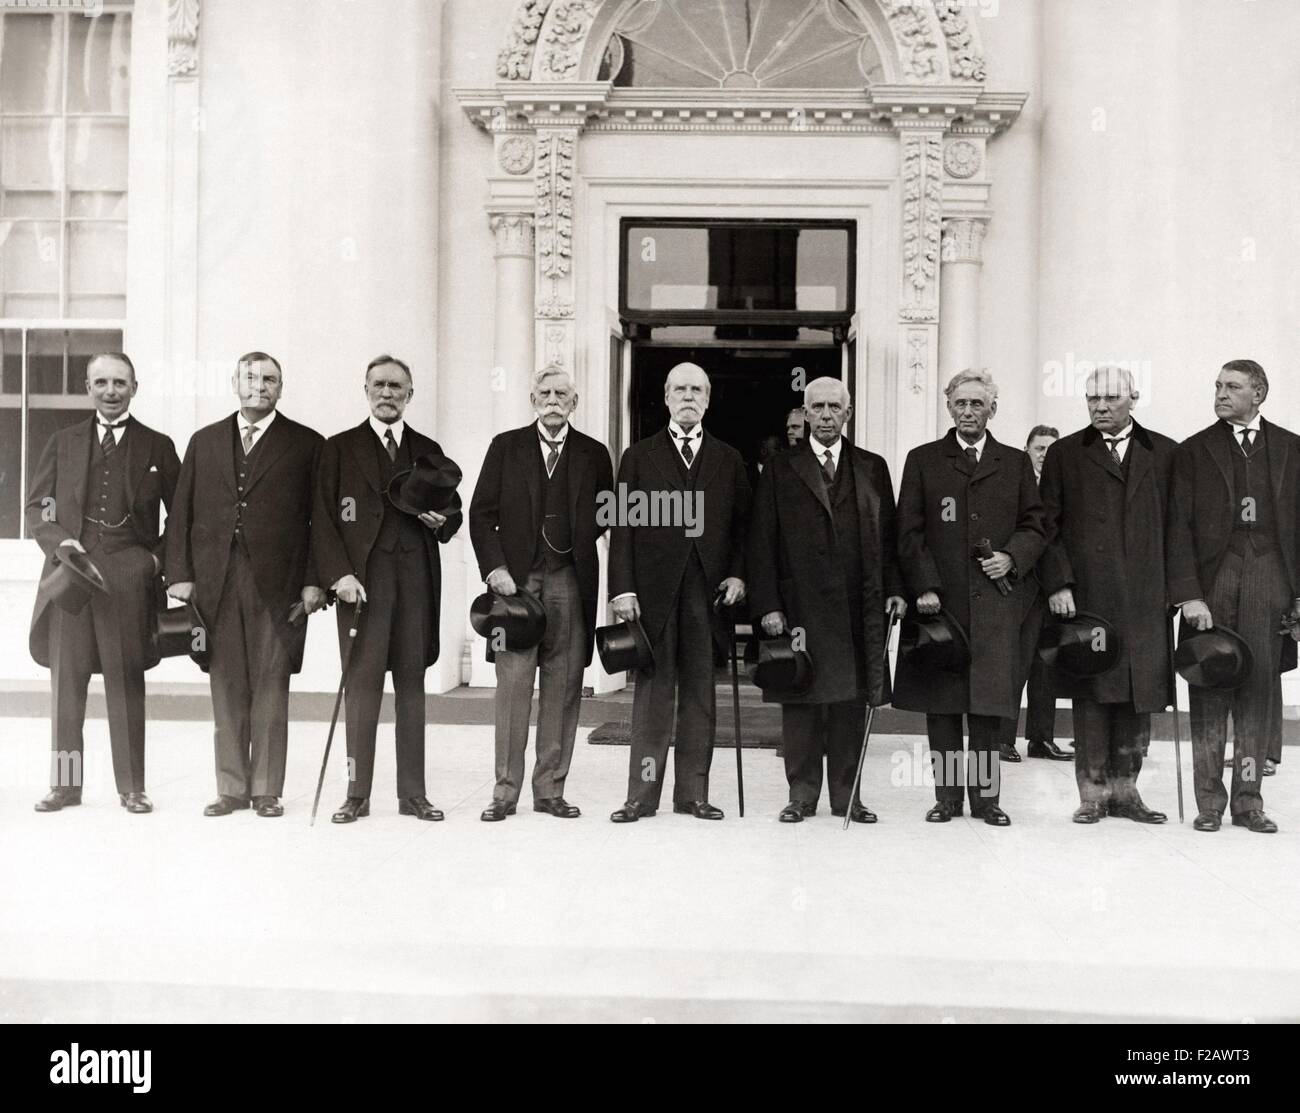 Chief Justice Charles Evans Hughes with Supreme Court Justices at the White House, Oct. 13, 1930. They notified President Herbert Hoover that the Court was in session. L-R: William Mitchell, Atty. Gen.; Harlan Fiske Stone; George Sutherland; Oliver Wendell Holmes; Charles Evans Hughes; Willis Van Devanter; Louis D Brandeis; Pierce Butler; and Owen J. Roberts. Hughes was portrayed by Louis Calhern in the 1946 stage play, and 1950 film, THE MAGNIFICENT YANKEE. (CSU 2015 11 1210) Stock Photo